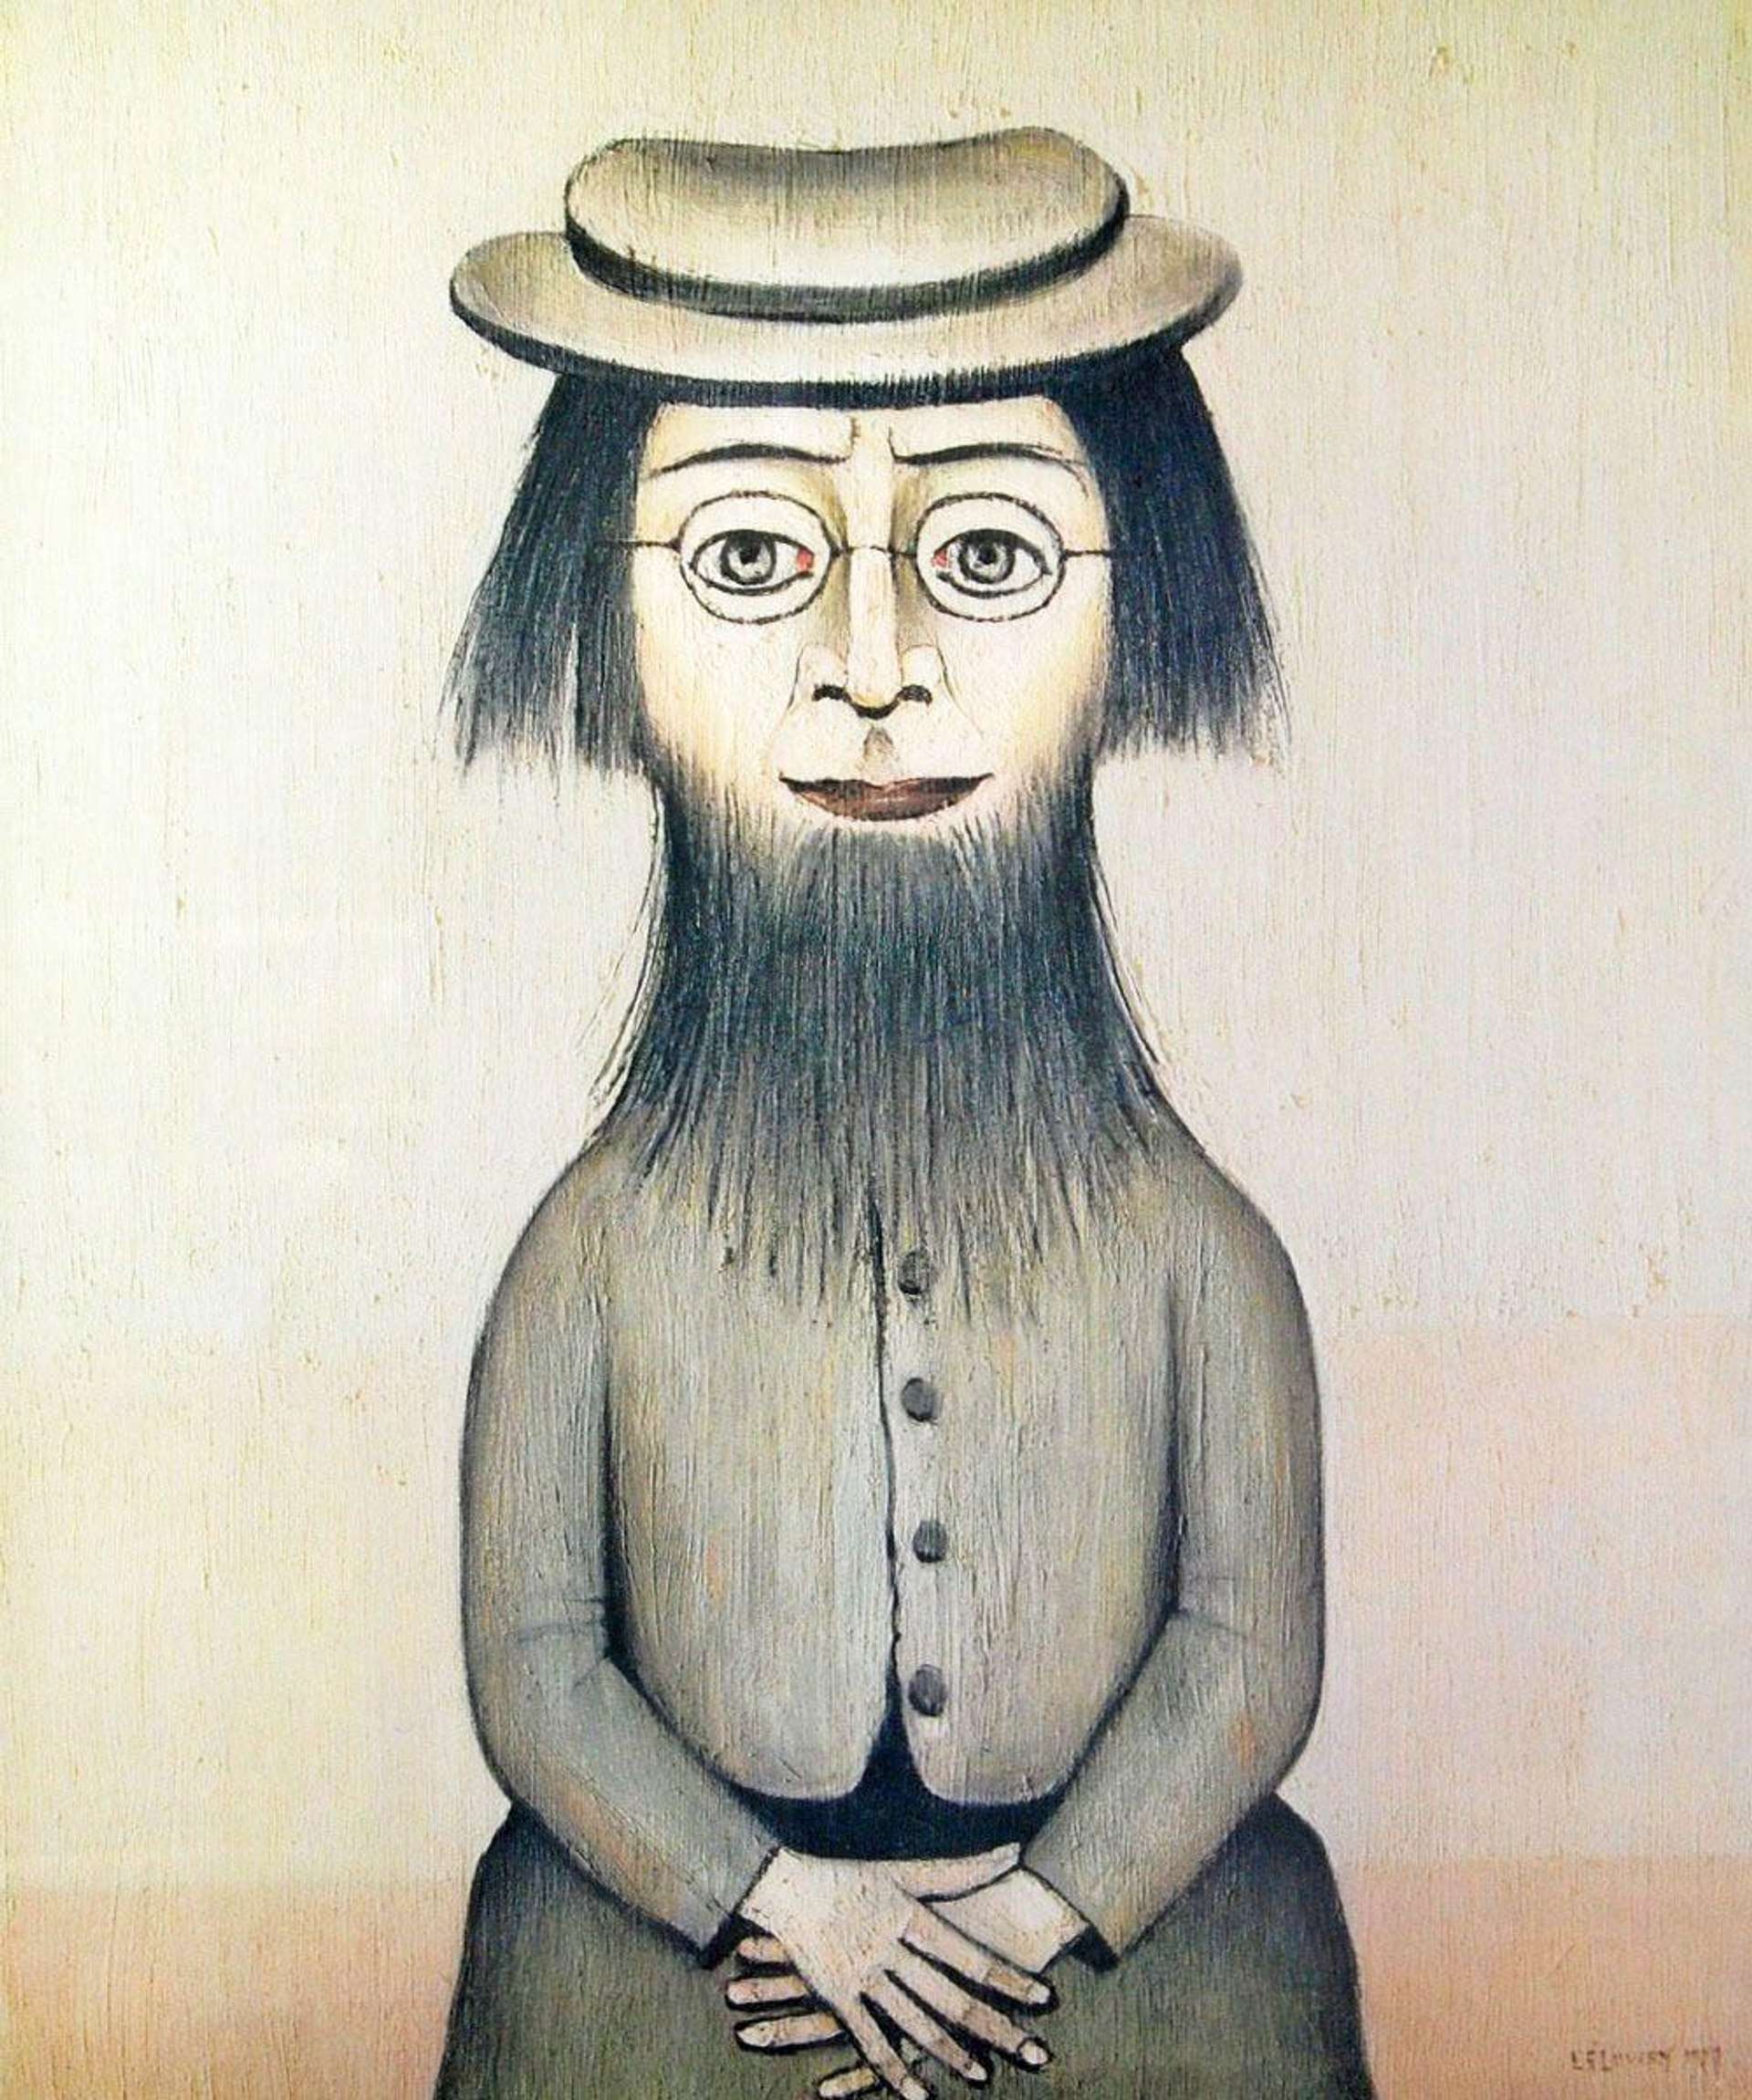 L.S. Lowry’s Woman With Beard.  A screenprint of a bearded woman with glasses and a hat, seated wearing a buttoned sweater with her hands folded across her lap. 